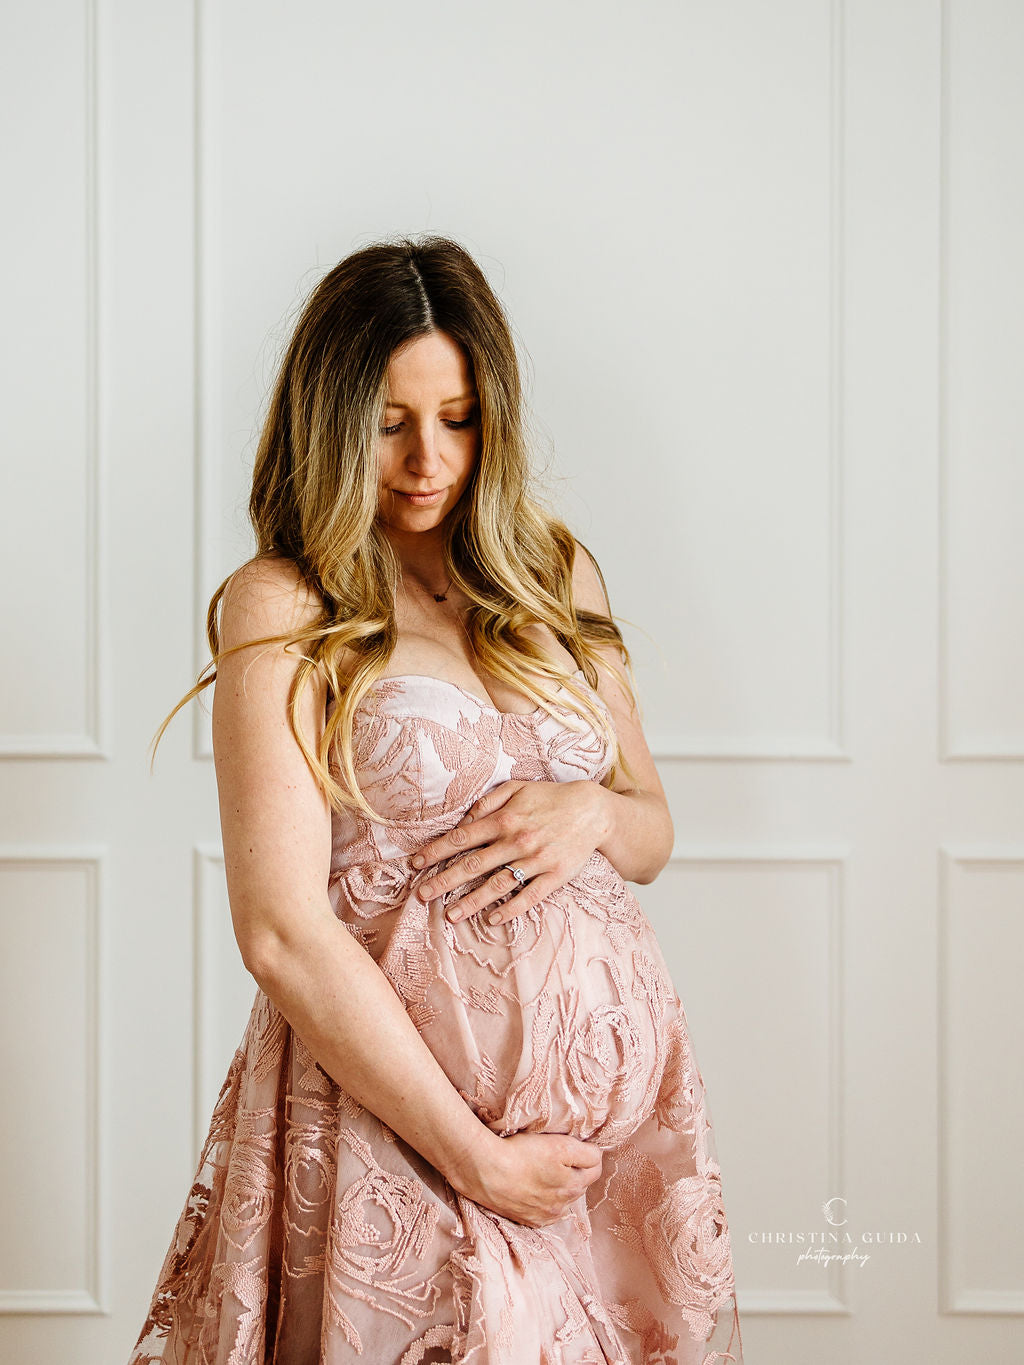 Dusty Pink Rose Gown - maternity photoshoot dress